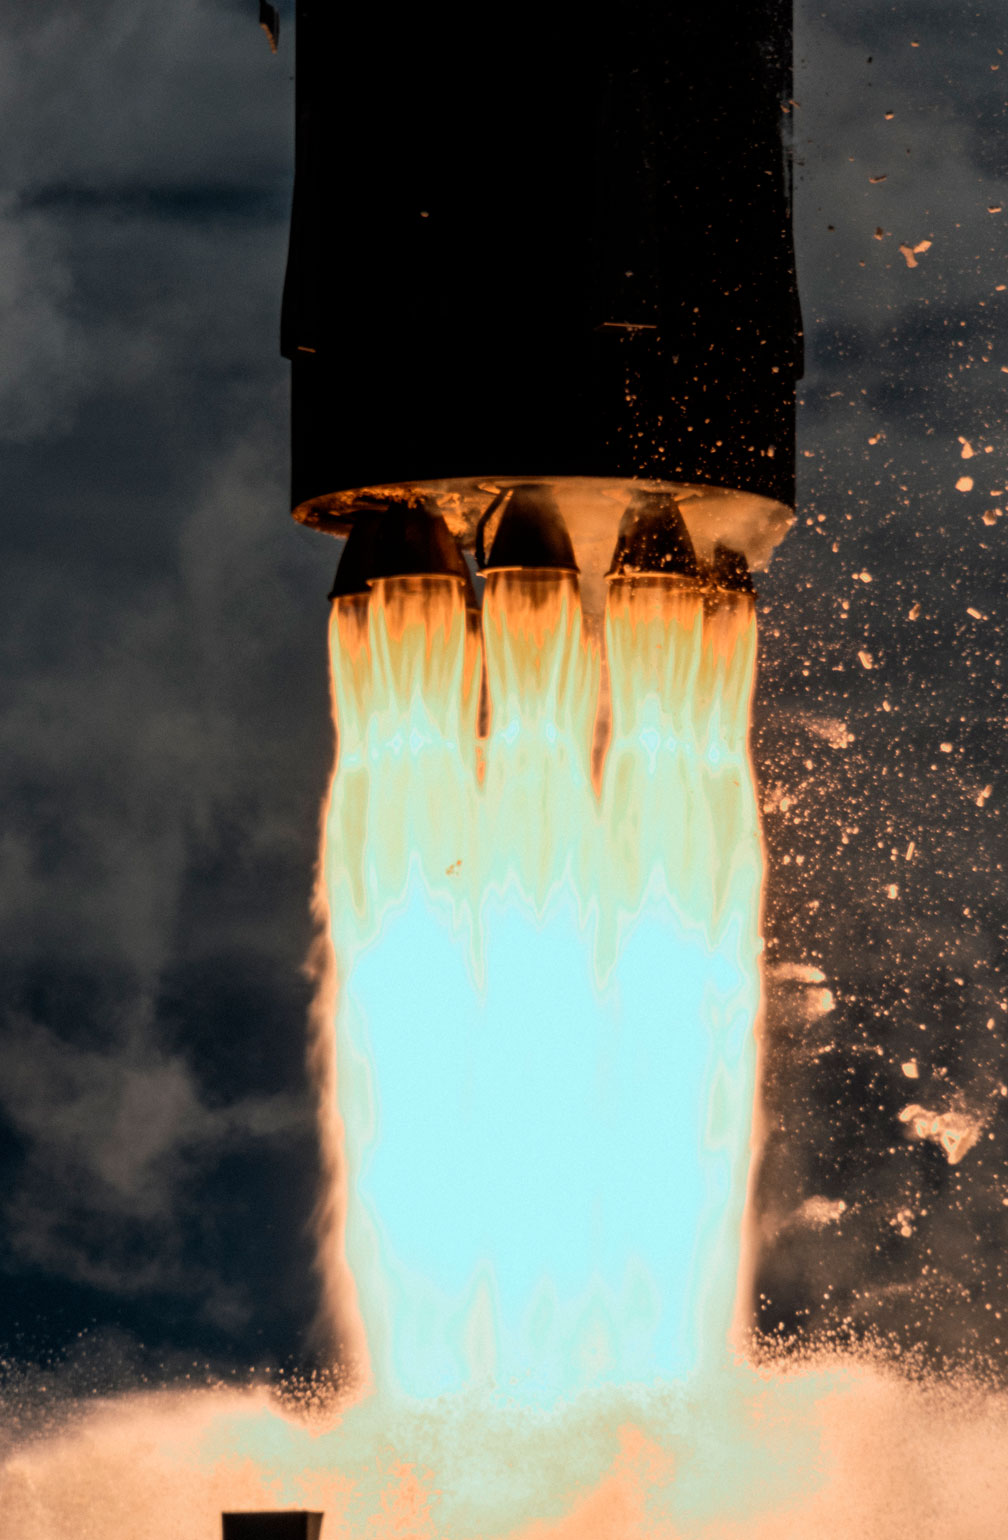 Image of Exolaunch mission 28